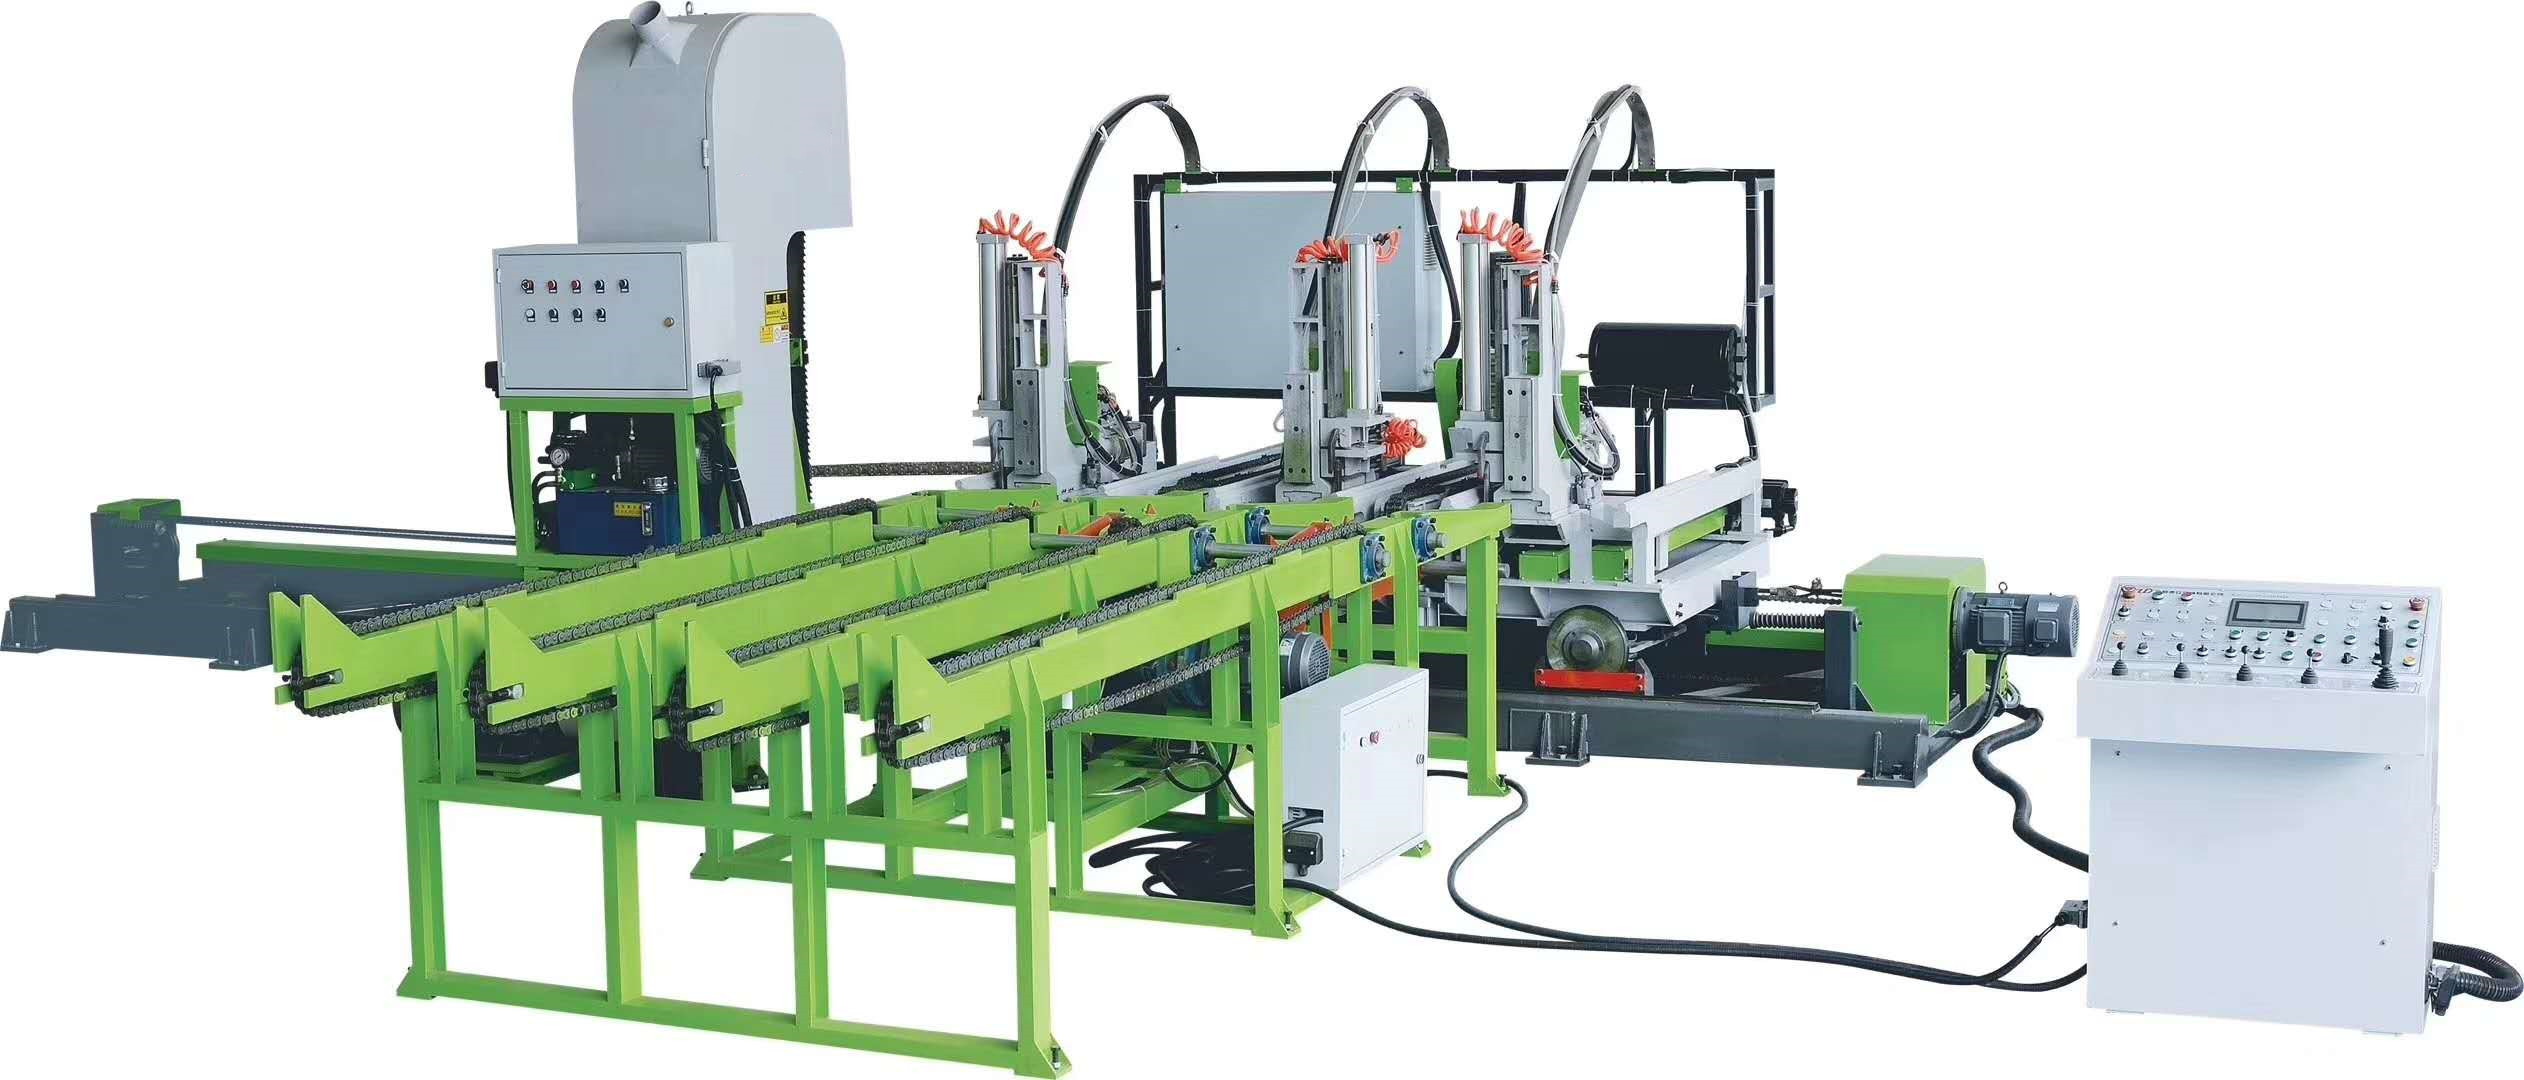 CNC carriage vertical band saw